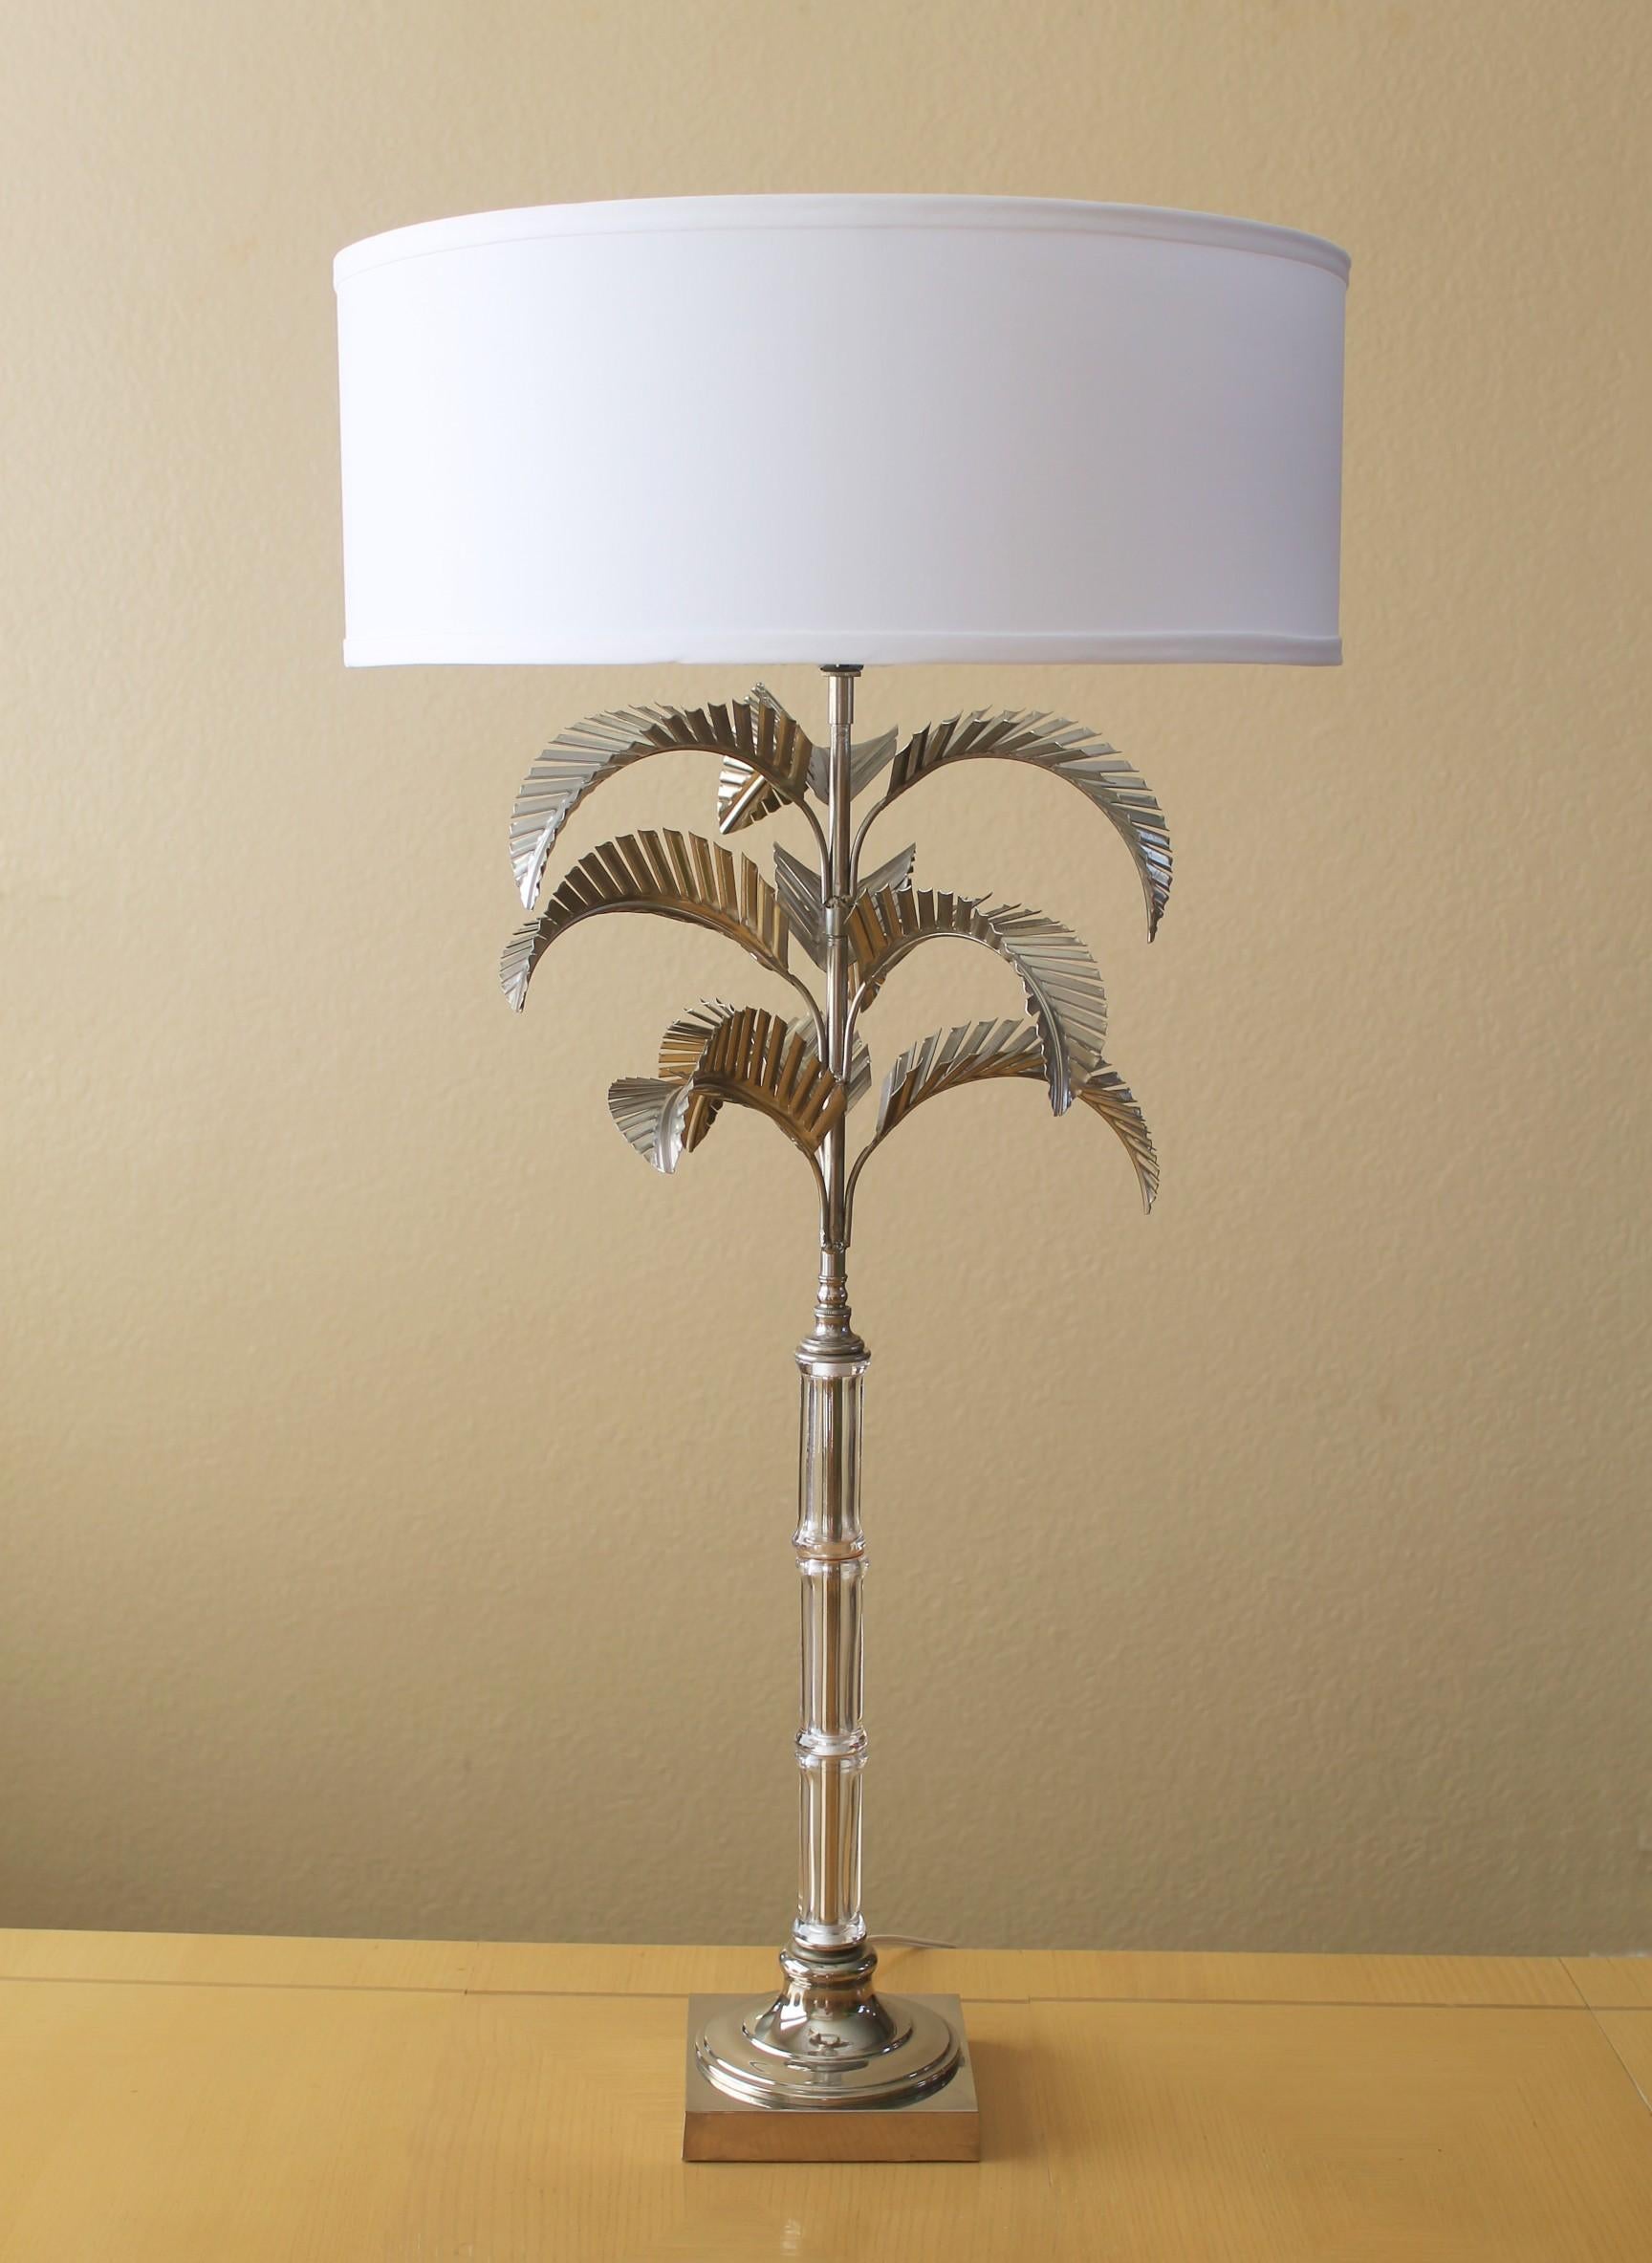 MAGNIFICENT!


Monumental Worked Metal
Palm Tree Table Lamp
By Chapman Manufacturing

Incredible Design!
Minty!

Palm Beach Regency Decor! 

Here is the incredible and coveted Palm Tree Table Lamp by Chapman Manufacturing.  This marvelous example is